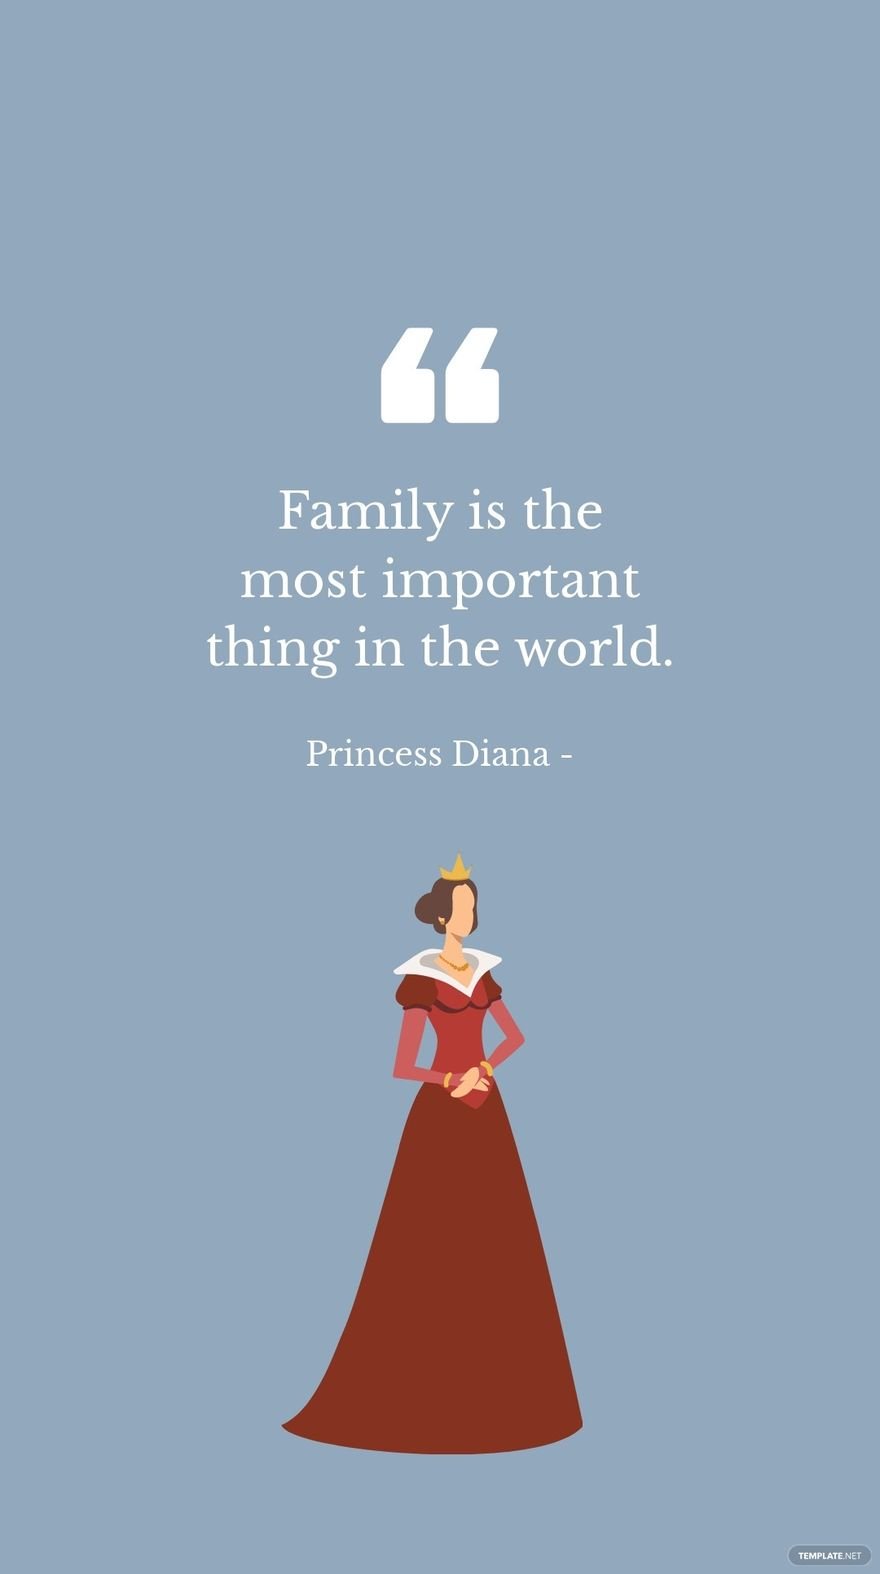 Free Princess Diana - Family is the most important thing in the world.